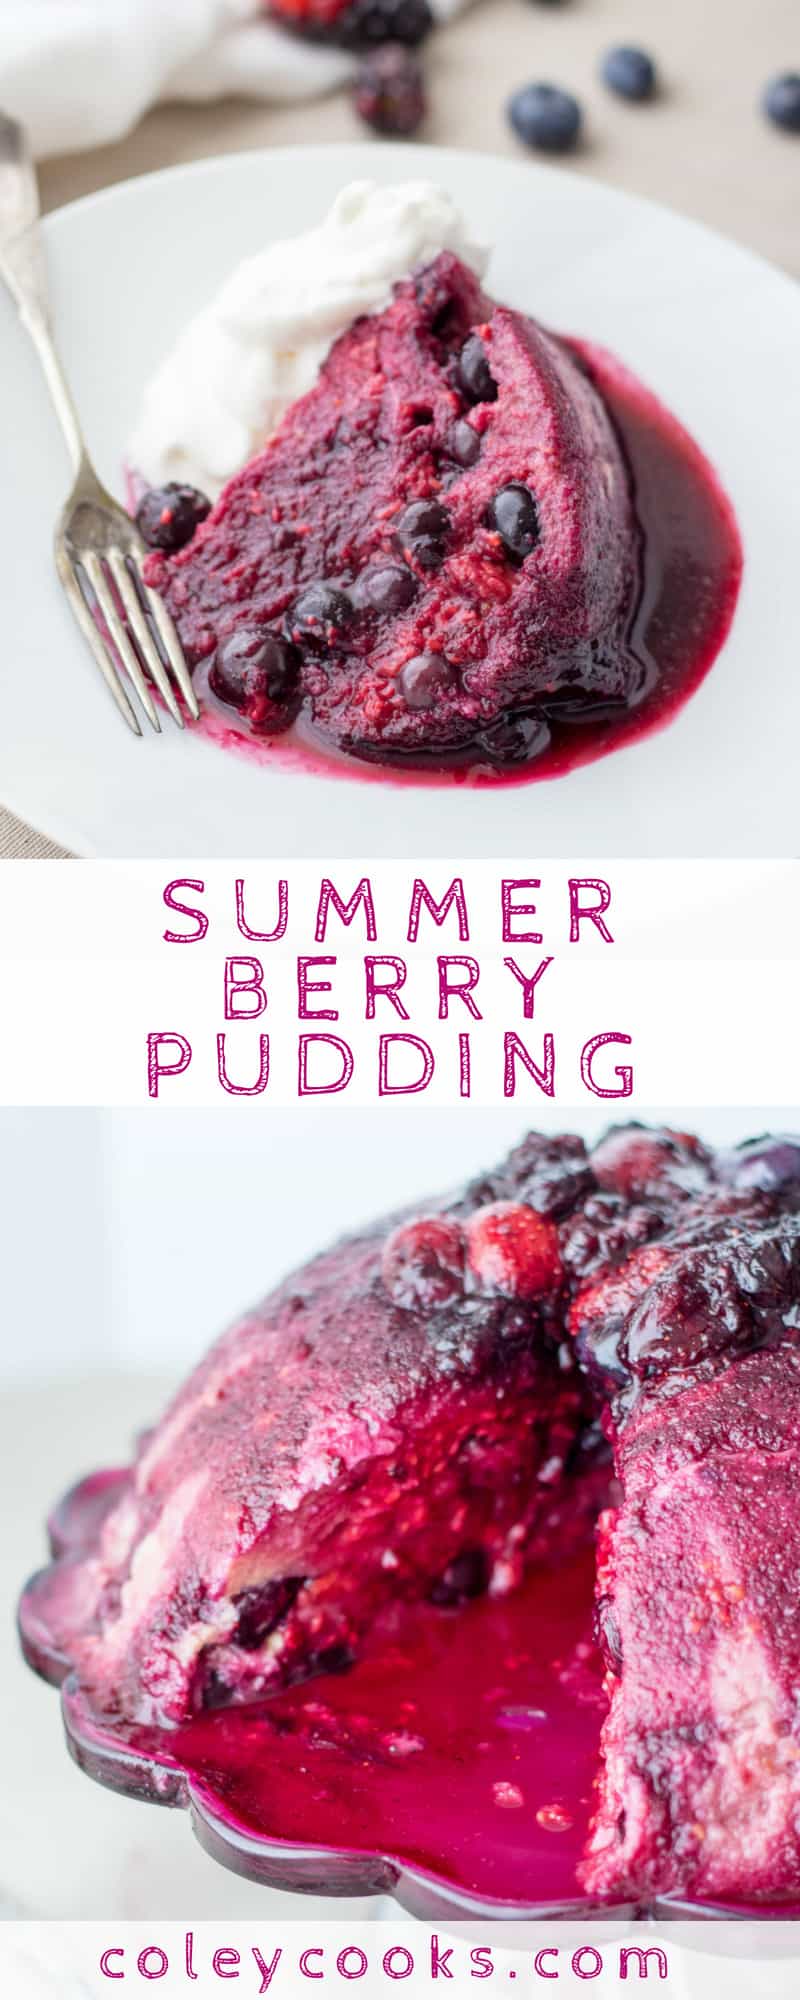 SUMMER BERRY PUDDING | This classic British dessert is so easy to make and can be made using any kind of leftover bread! #easy #summer #dessert #recipe #British | ColeyCooks.com